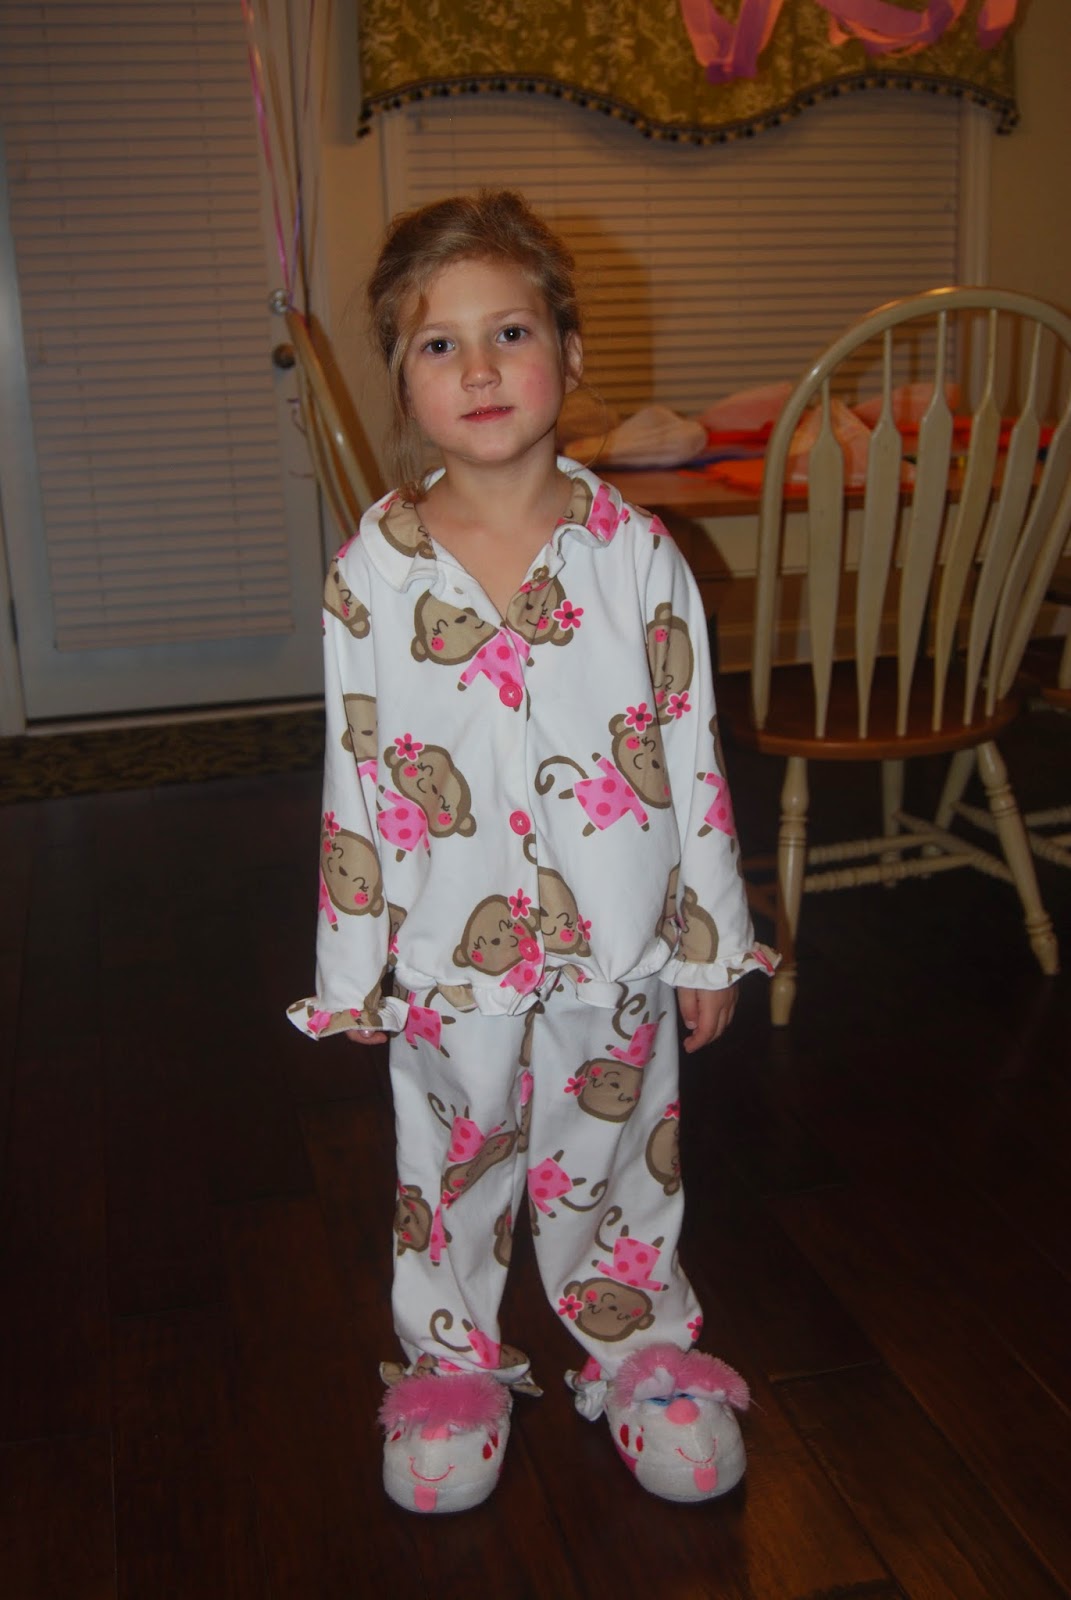 LIFE WITH THE ECKLEYS: Pizza & Pajamas